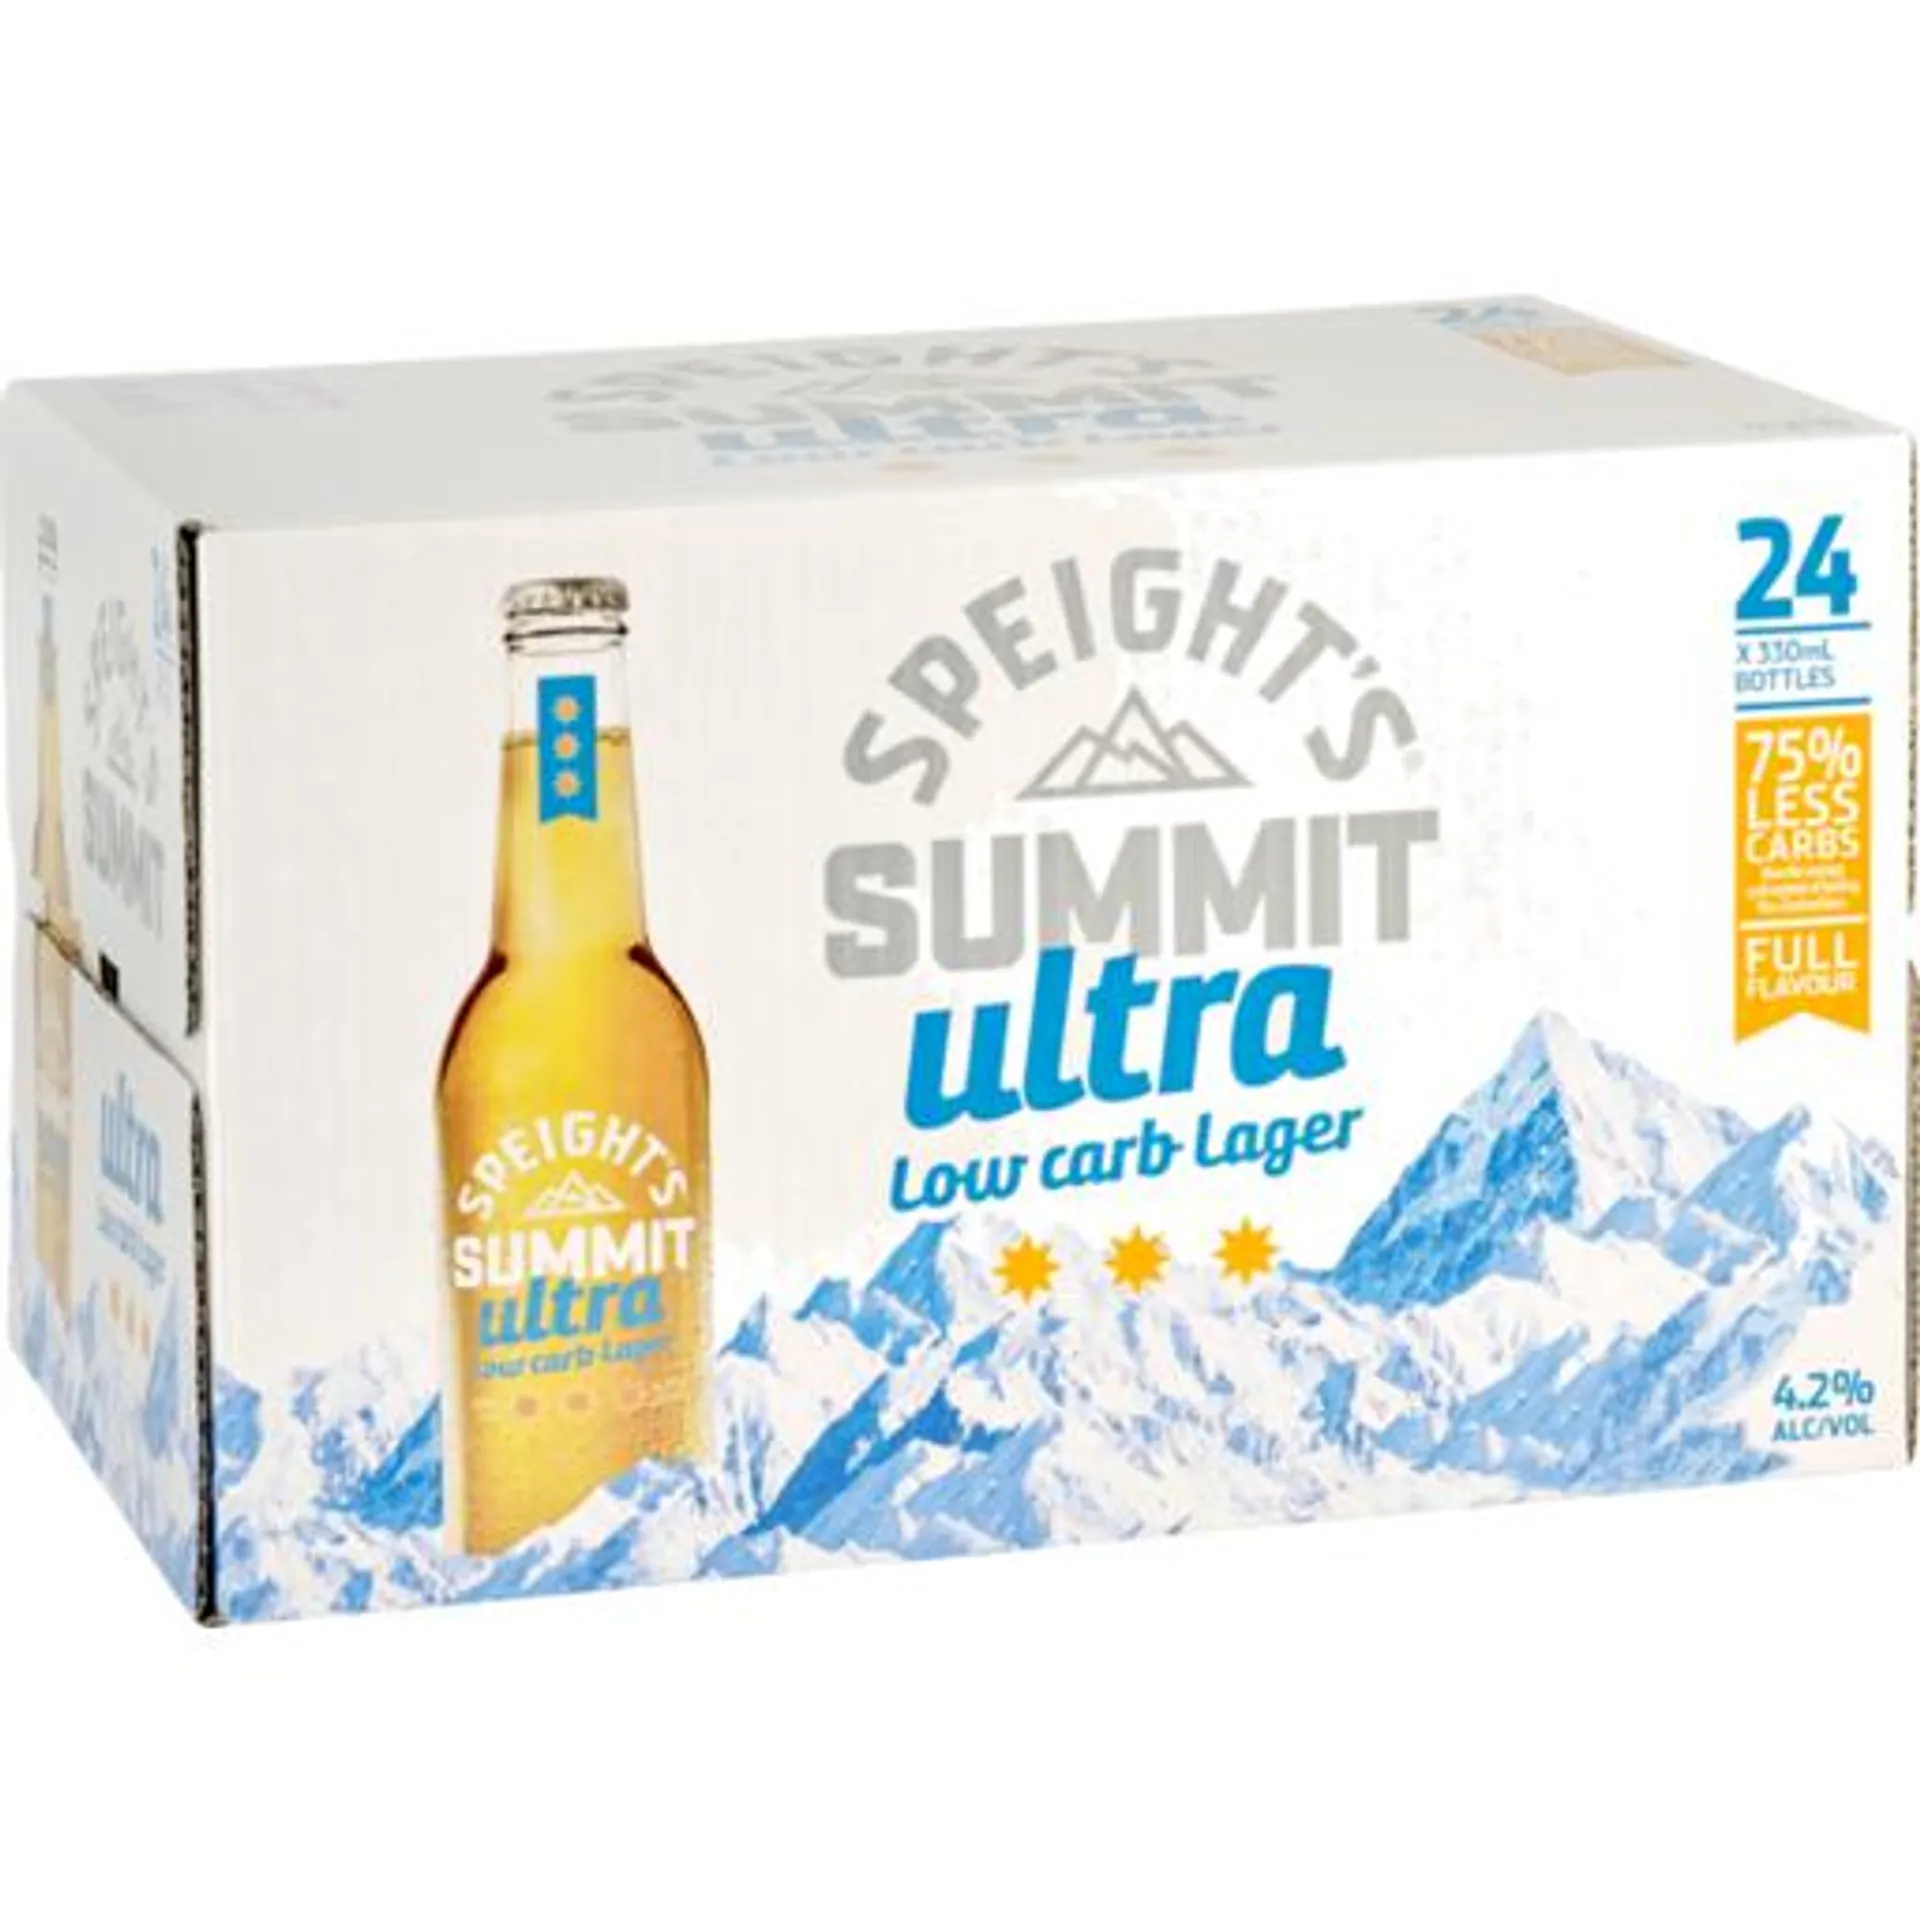 Speight's Summit Ultra Low Carb 24 x 330ml Bottles